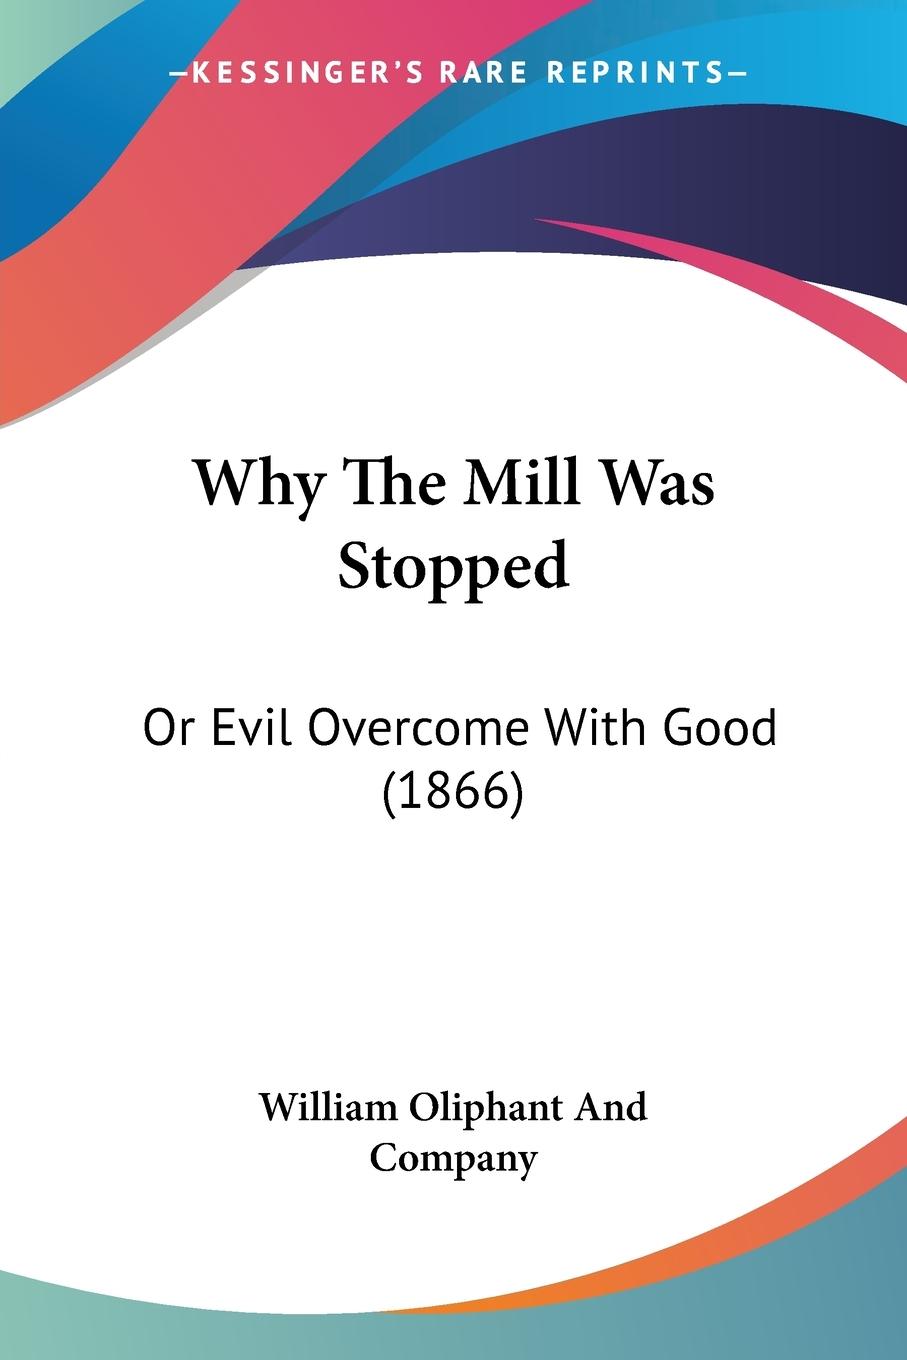 Why The Mill Was Stopped - William Oliphant And Company